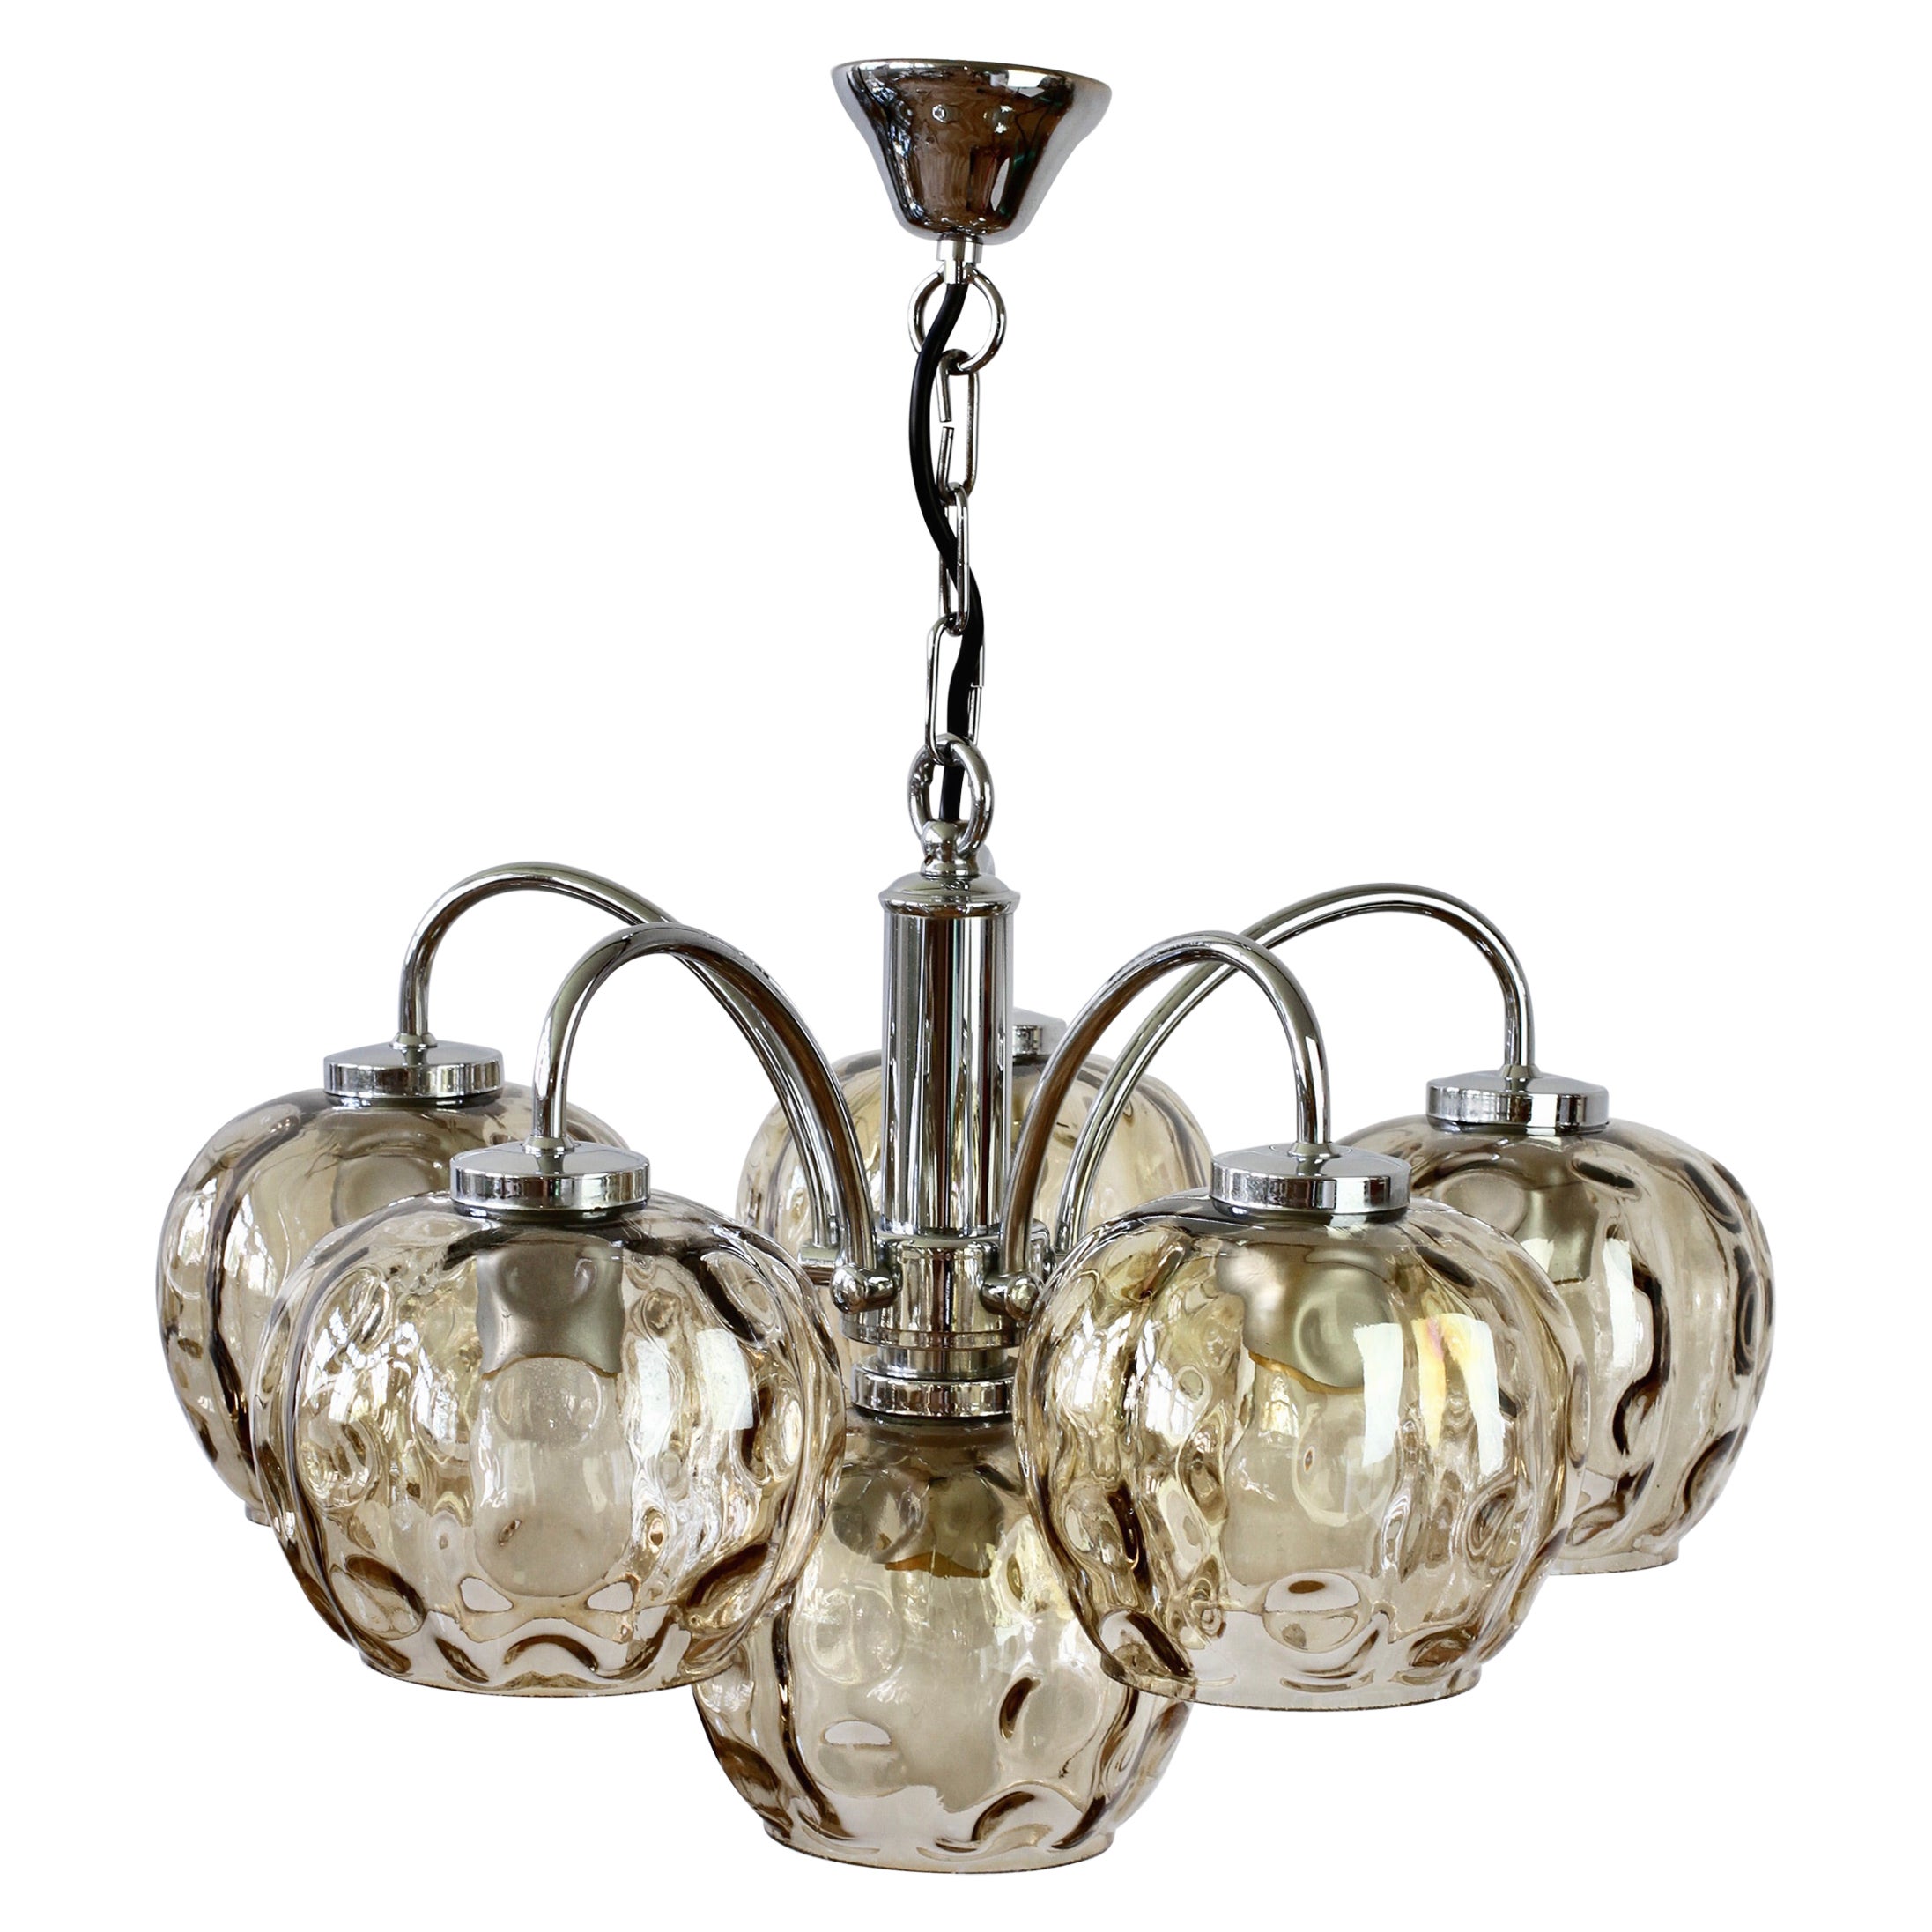 1970s Vintage Six Arm Chrome Chandelier with Smoked Toned "Bubble" Glass Shades